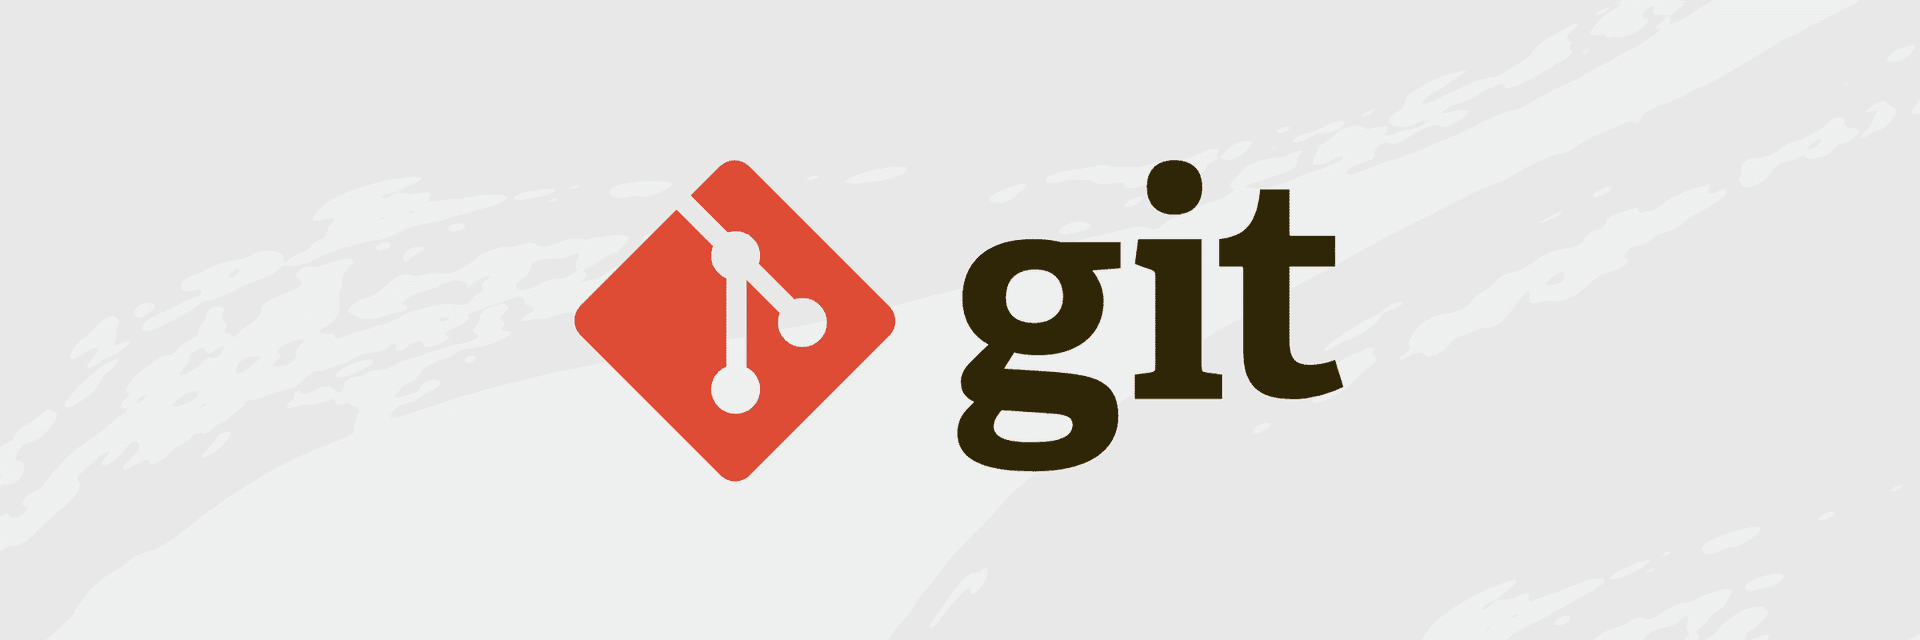 How git works with Buddy - baby steps guide to version control